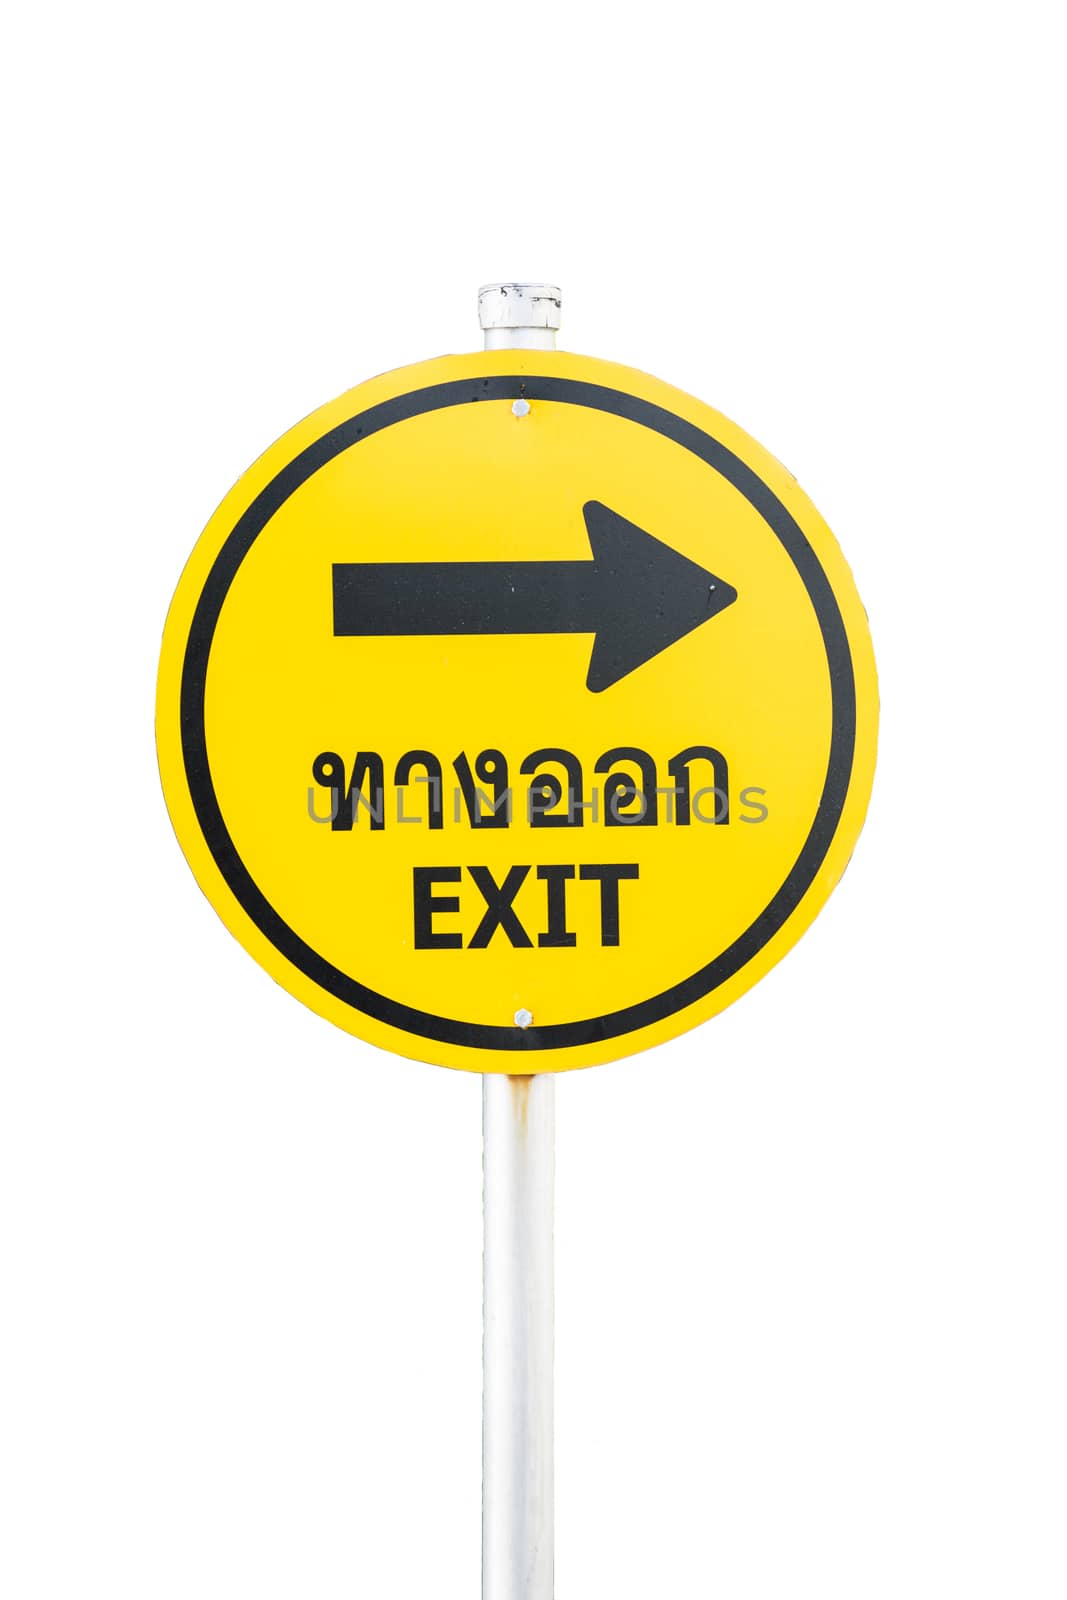 Exit signboards